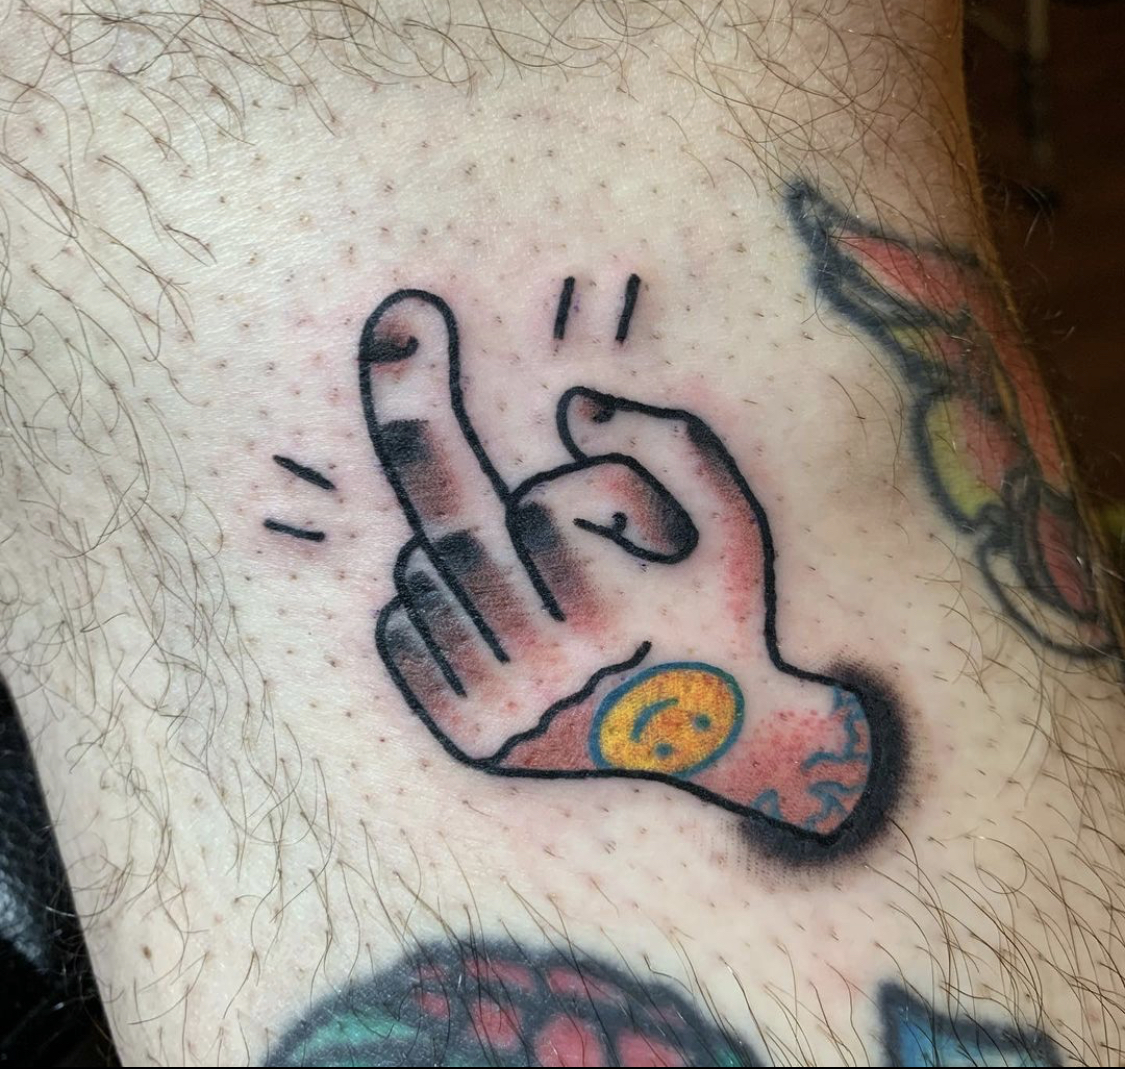 A middle finger with a smiley face tattooed on the back of the hand.